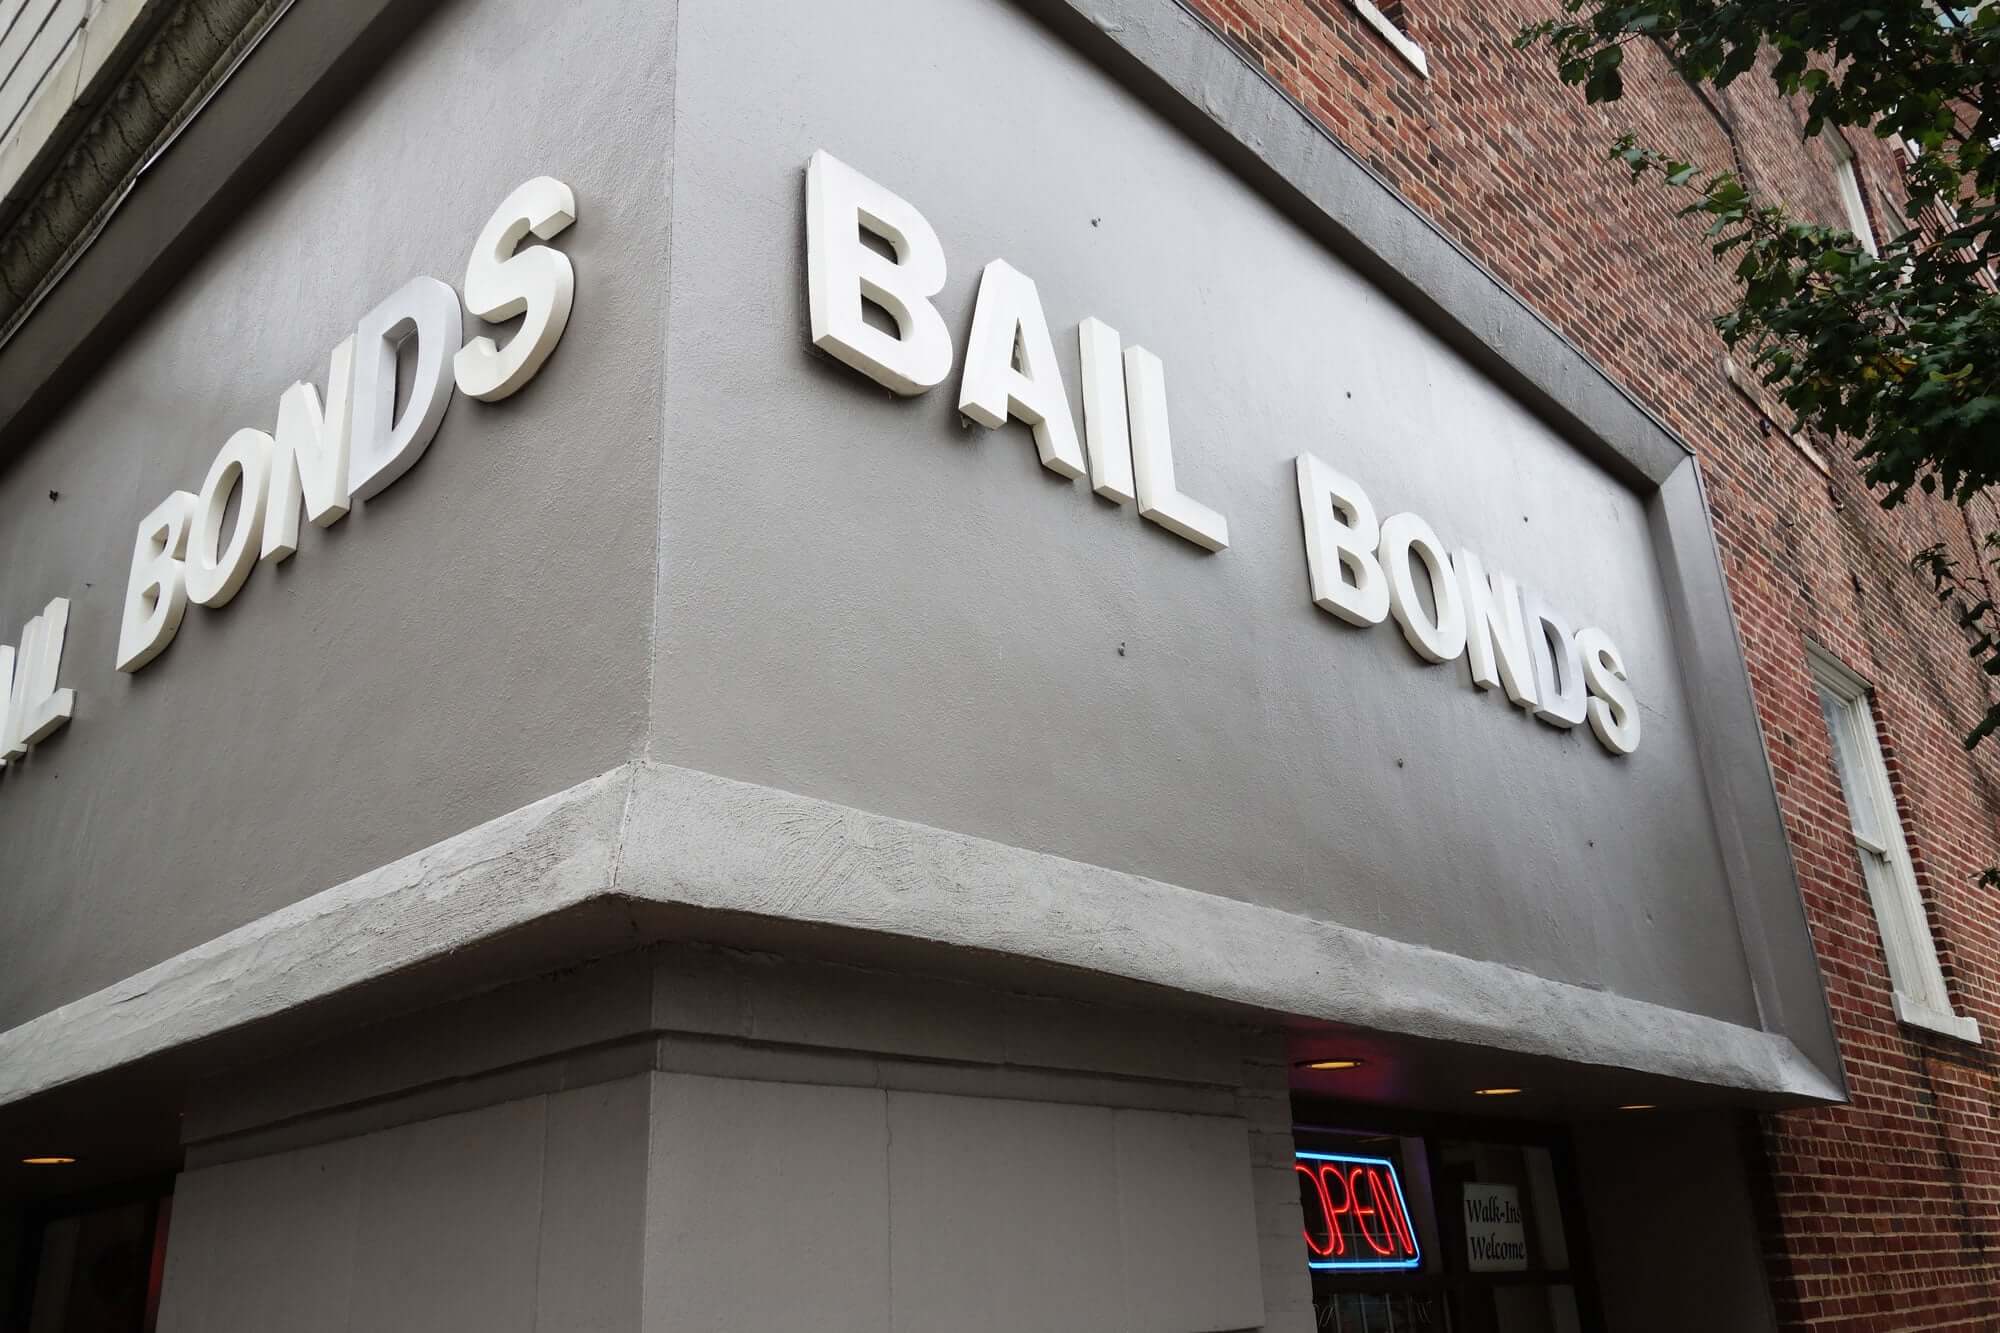 How To Open A Bail Bonds Business